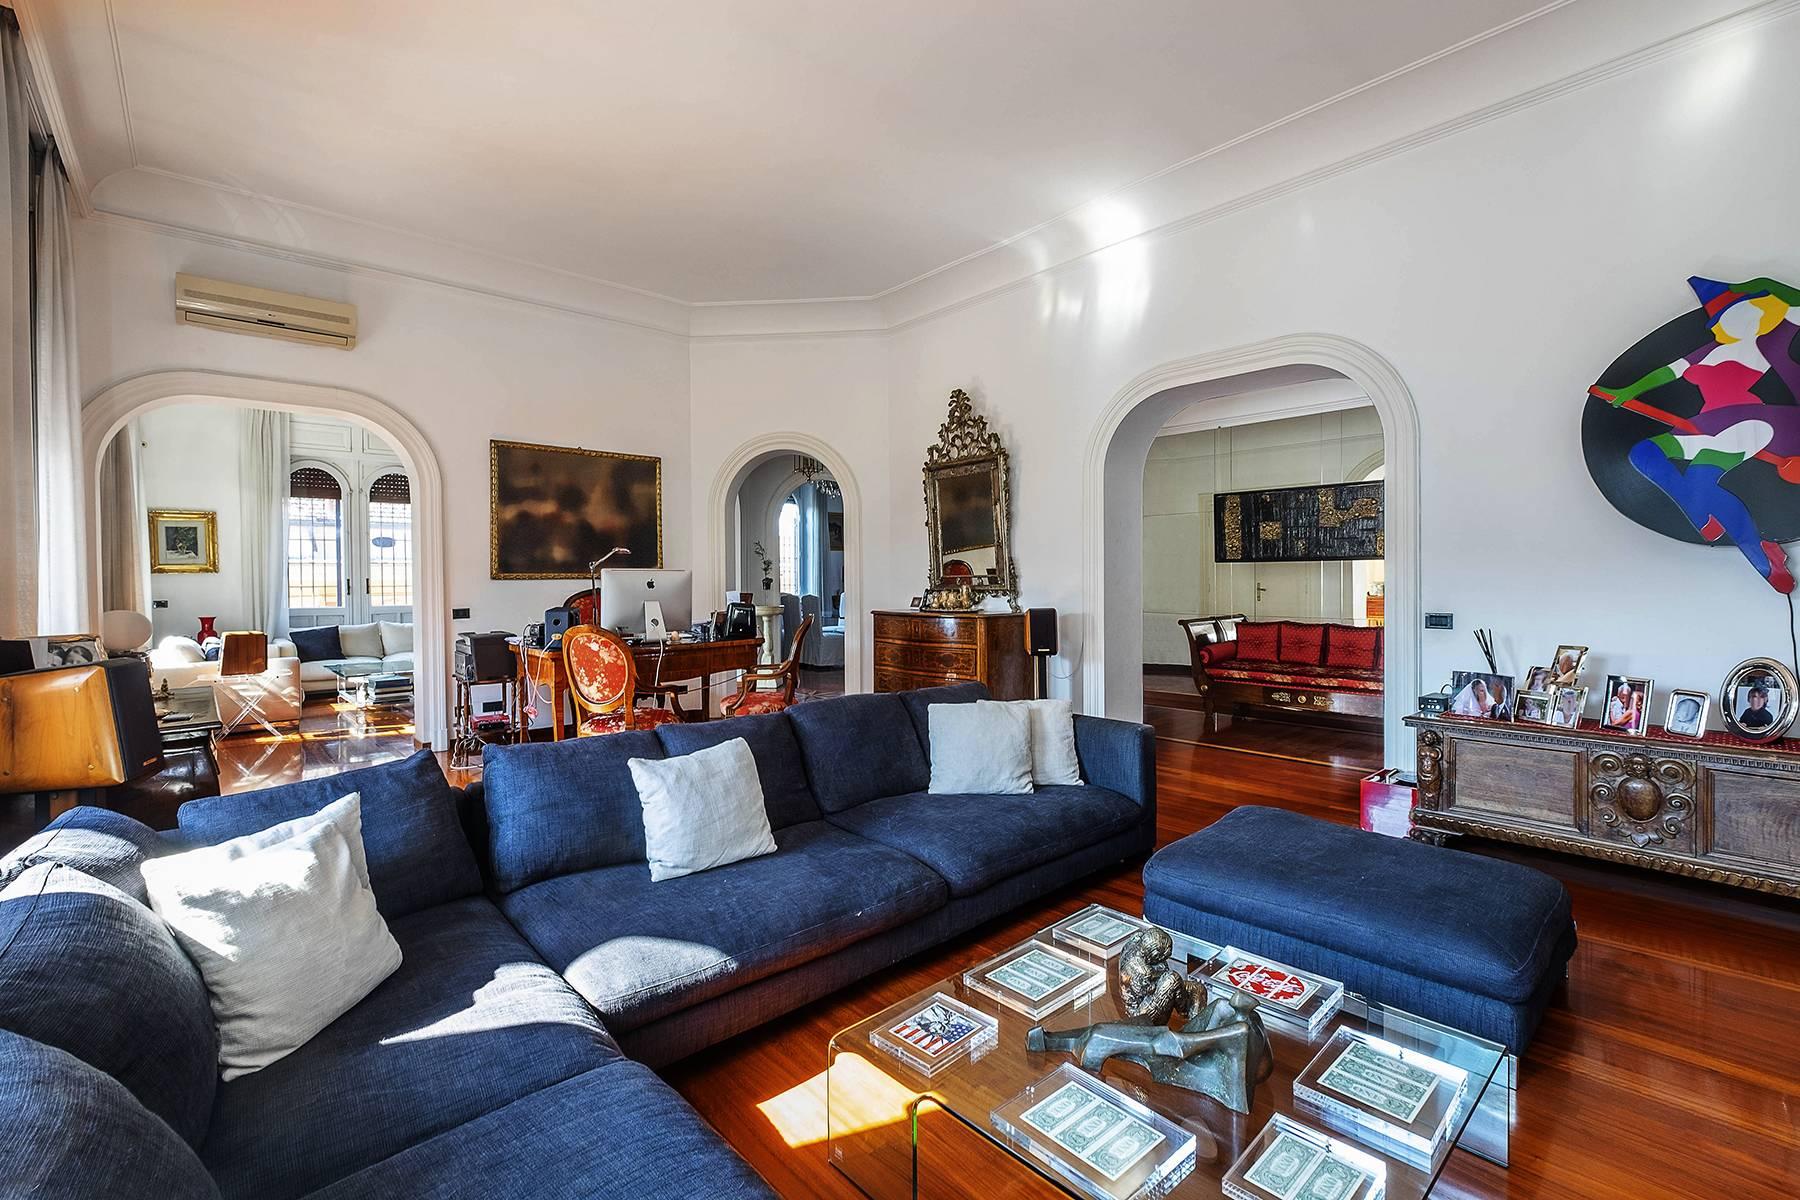 Superb penthouse located in an elegant Coppedè-style building - 5